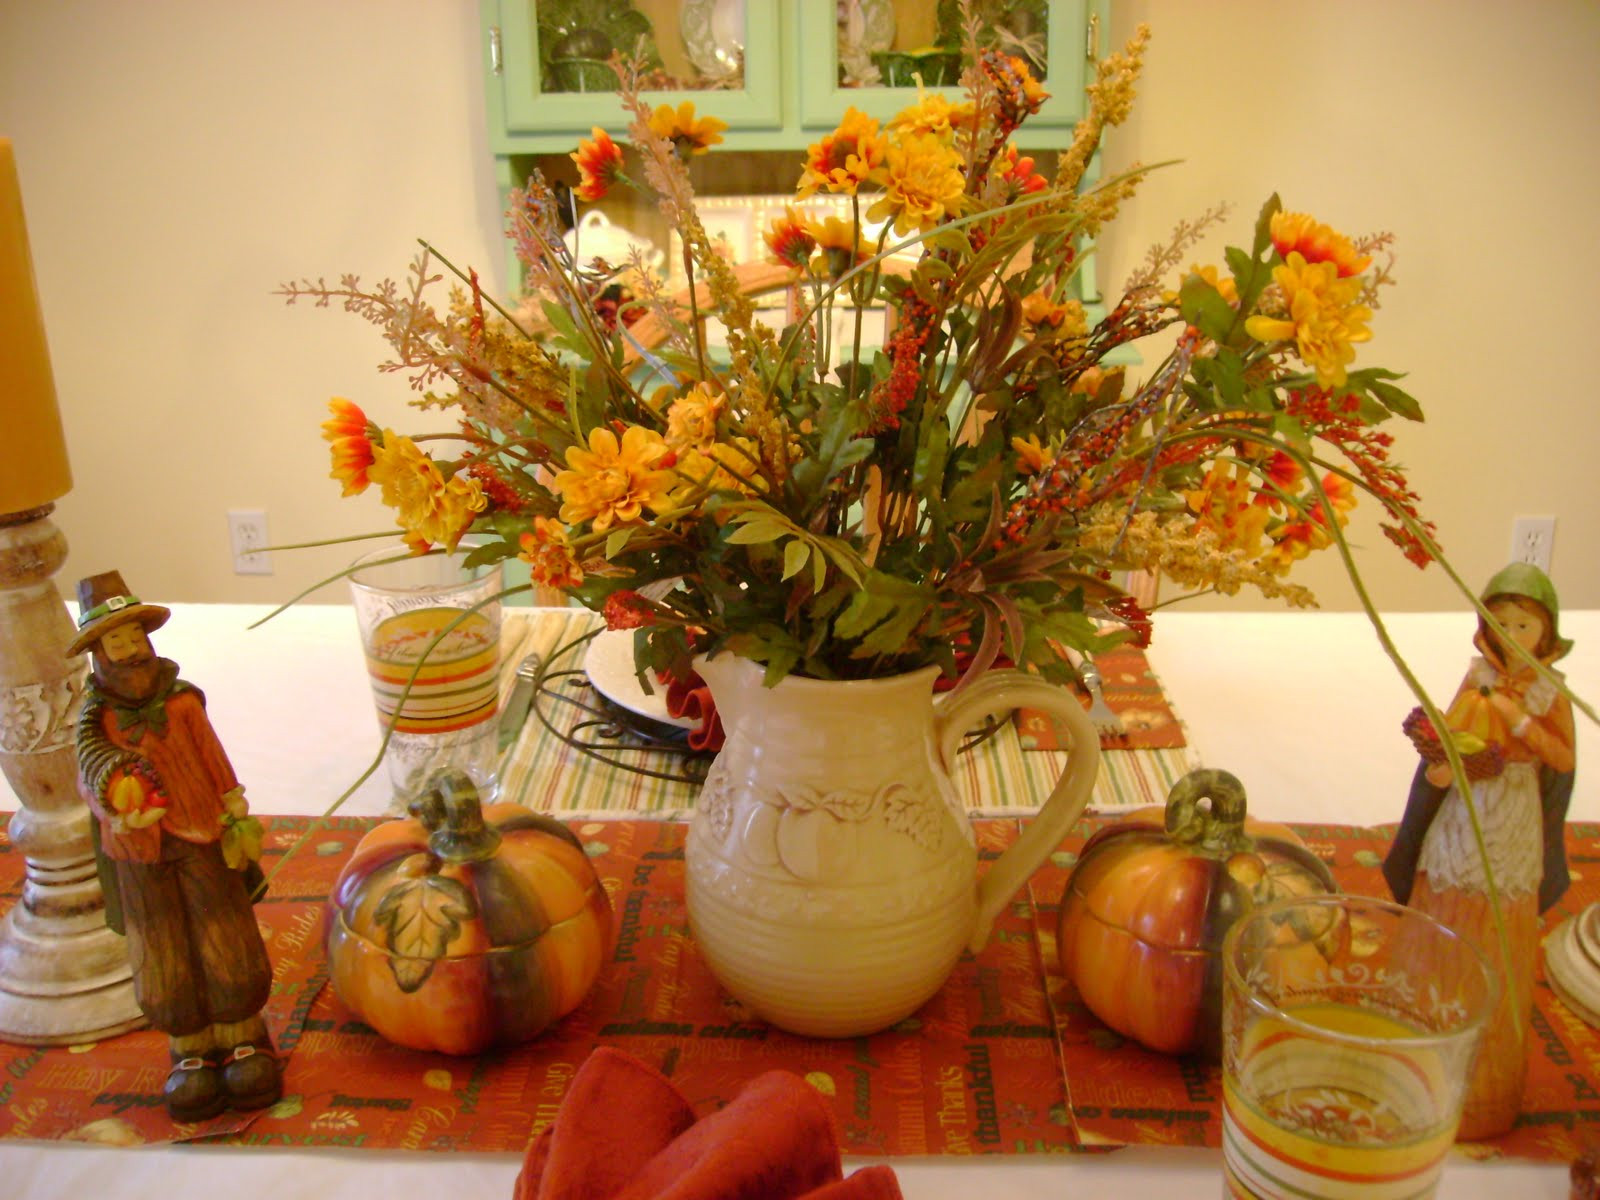 Thanksgiving Table Decorations
 The Sunny Side of the Sun Porch My Thanksgiving Table